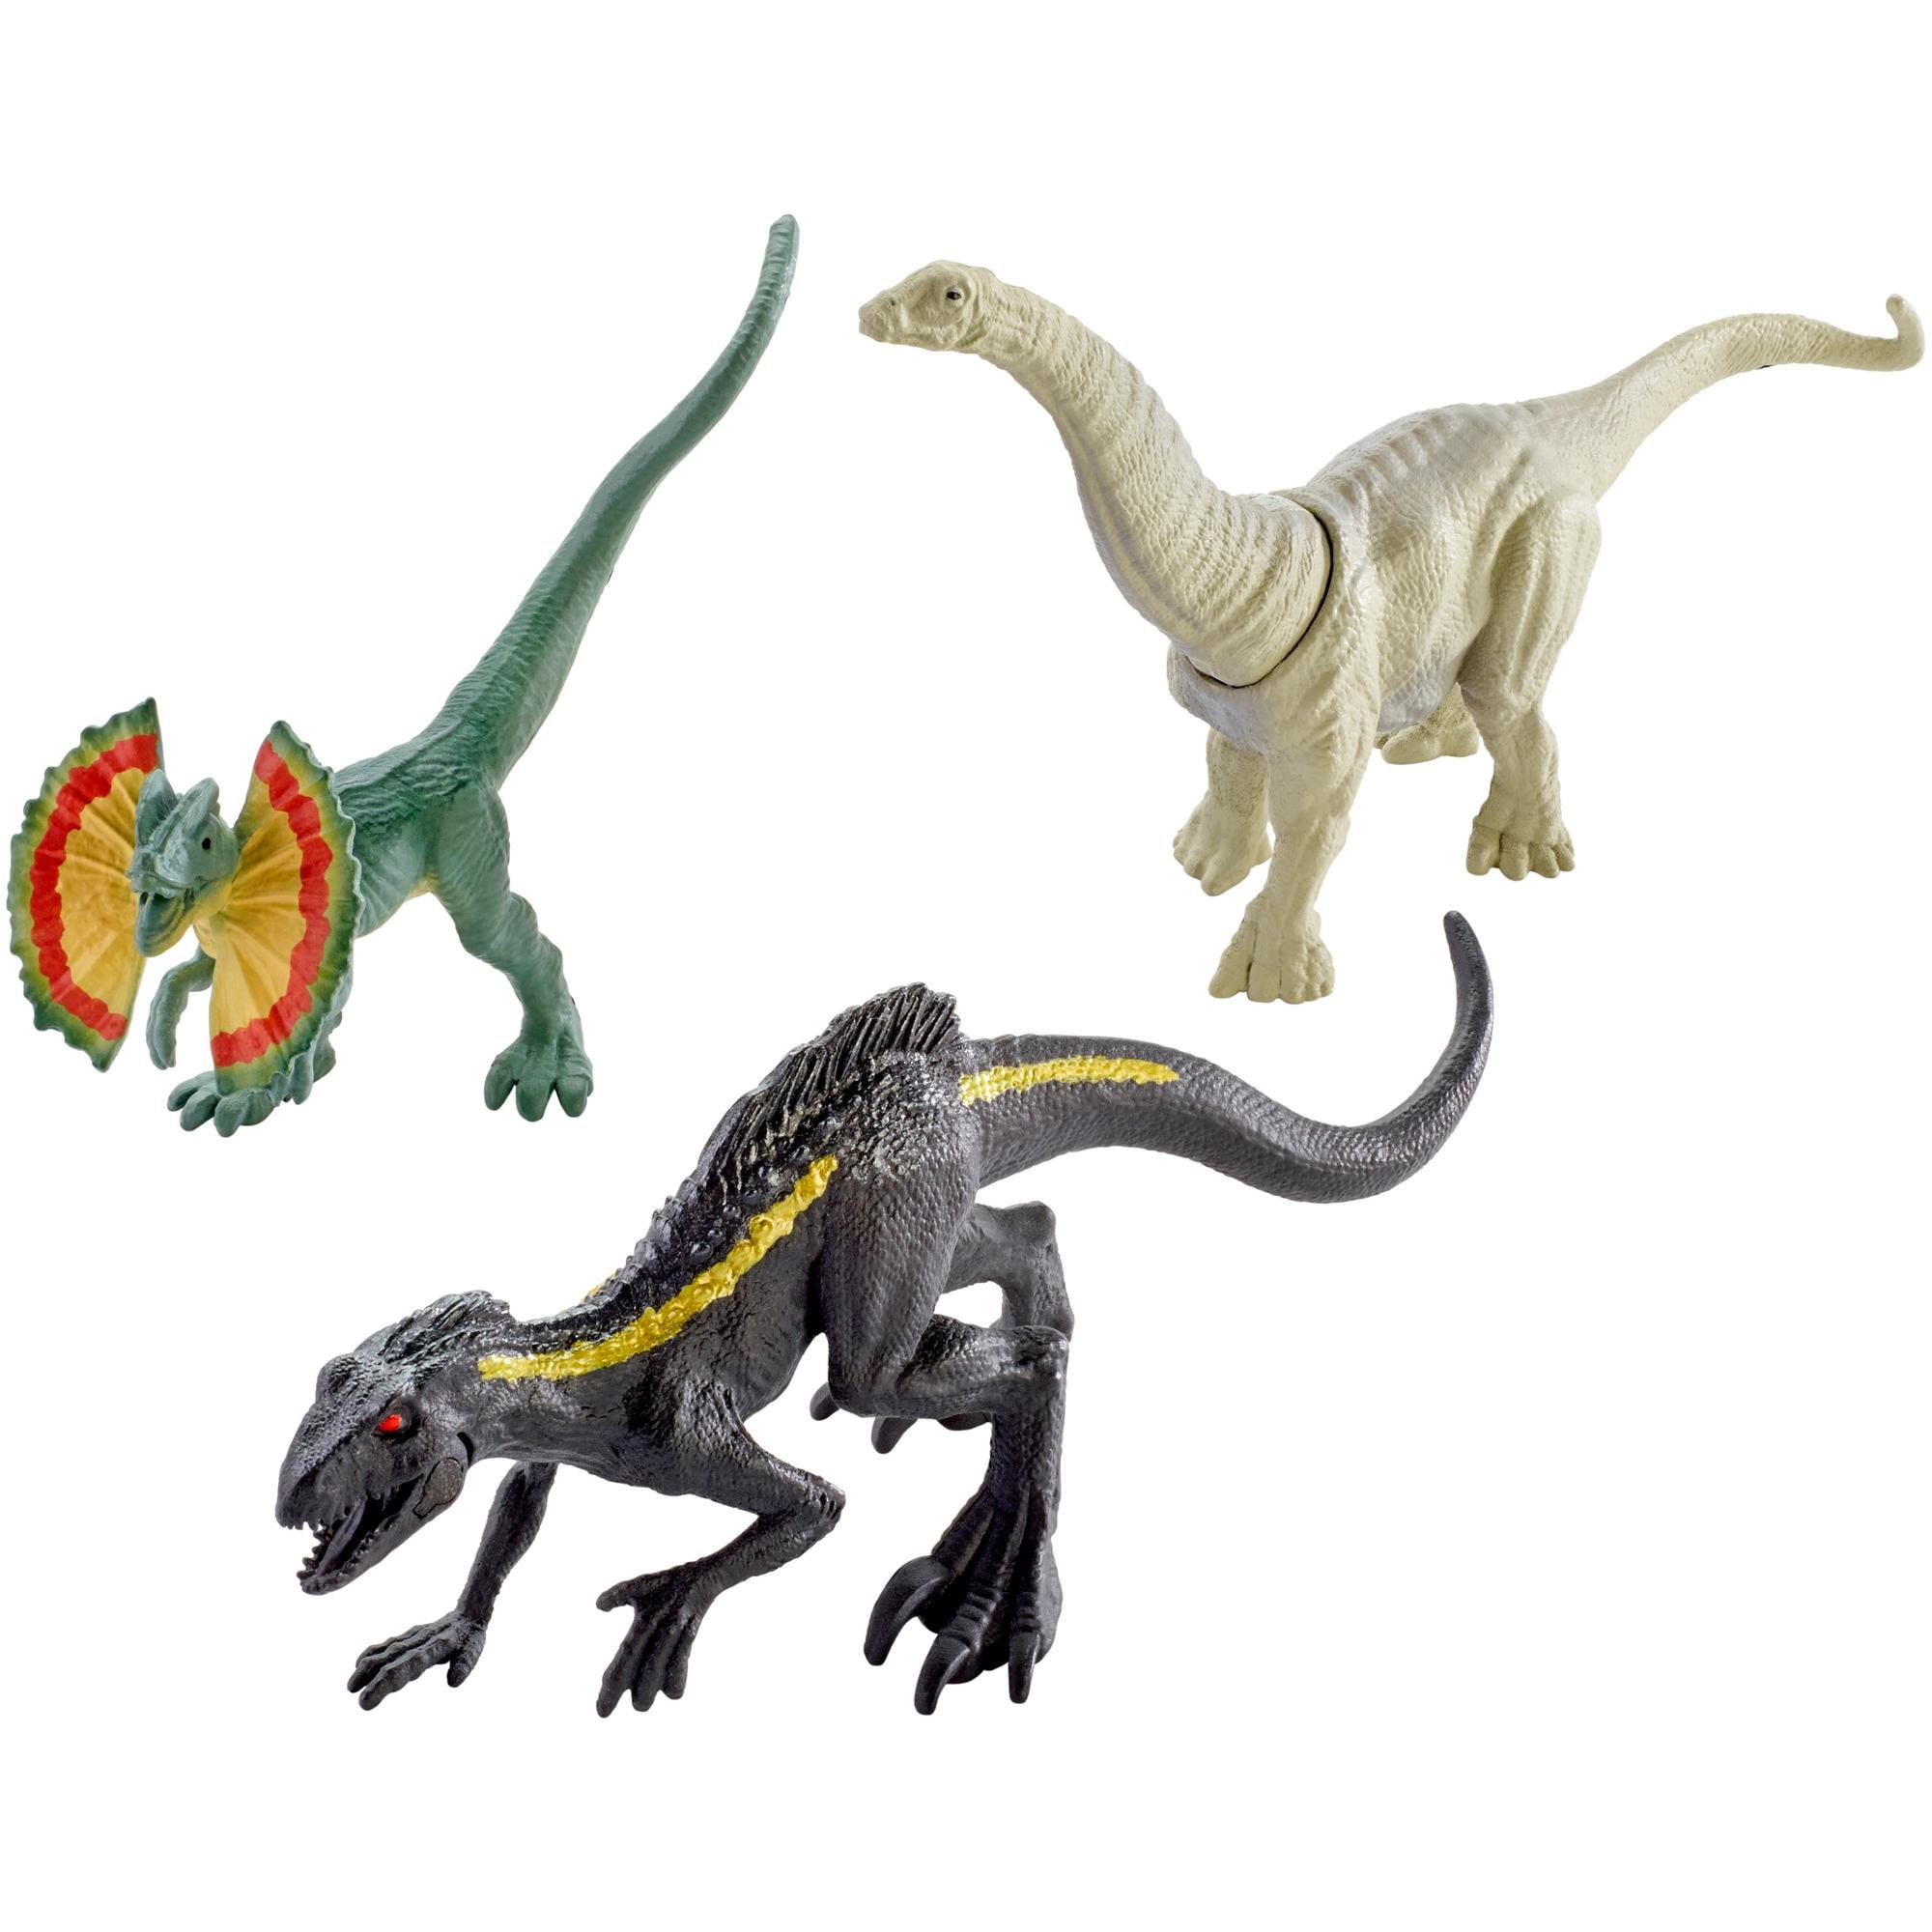 Pack 3 vehiculos micromachines s.2 Juguetes Don Dino